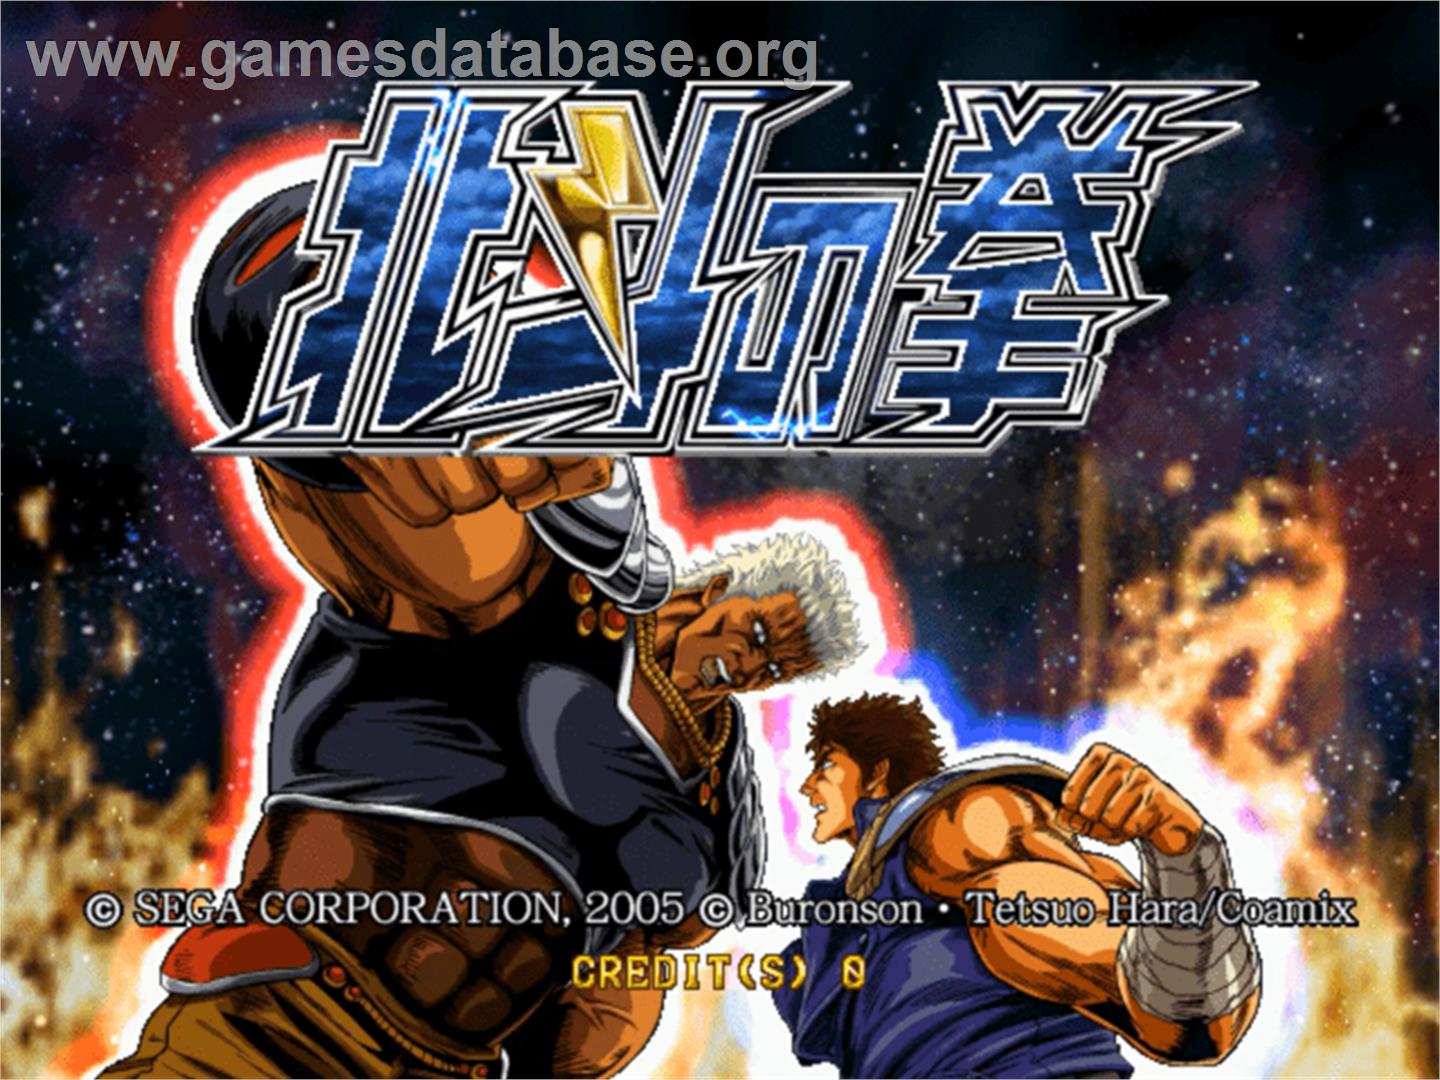 Fist Of The North Star - Sammy Atomiswave - Artwork - Title Screen